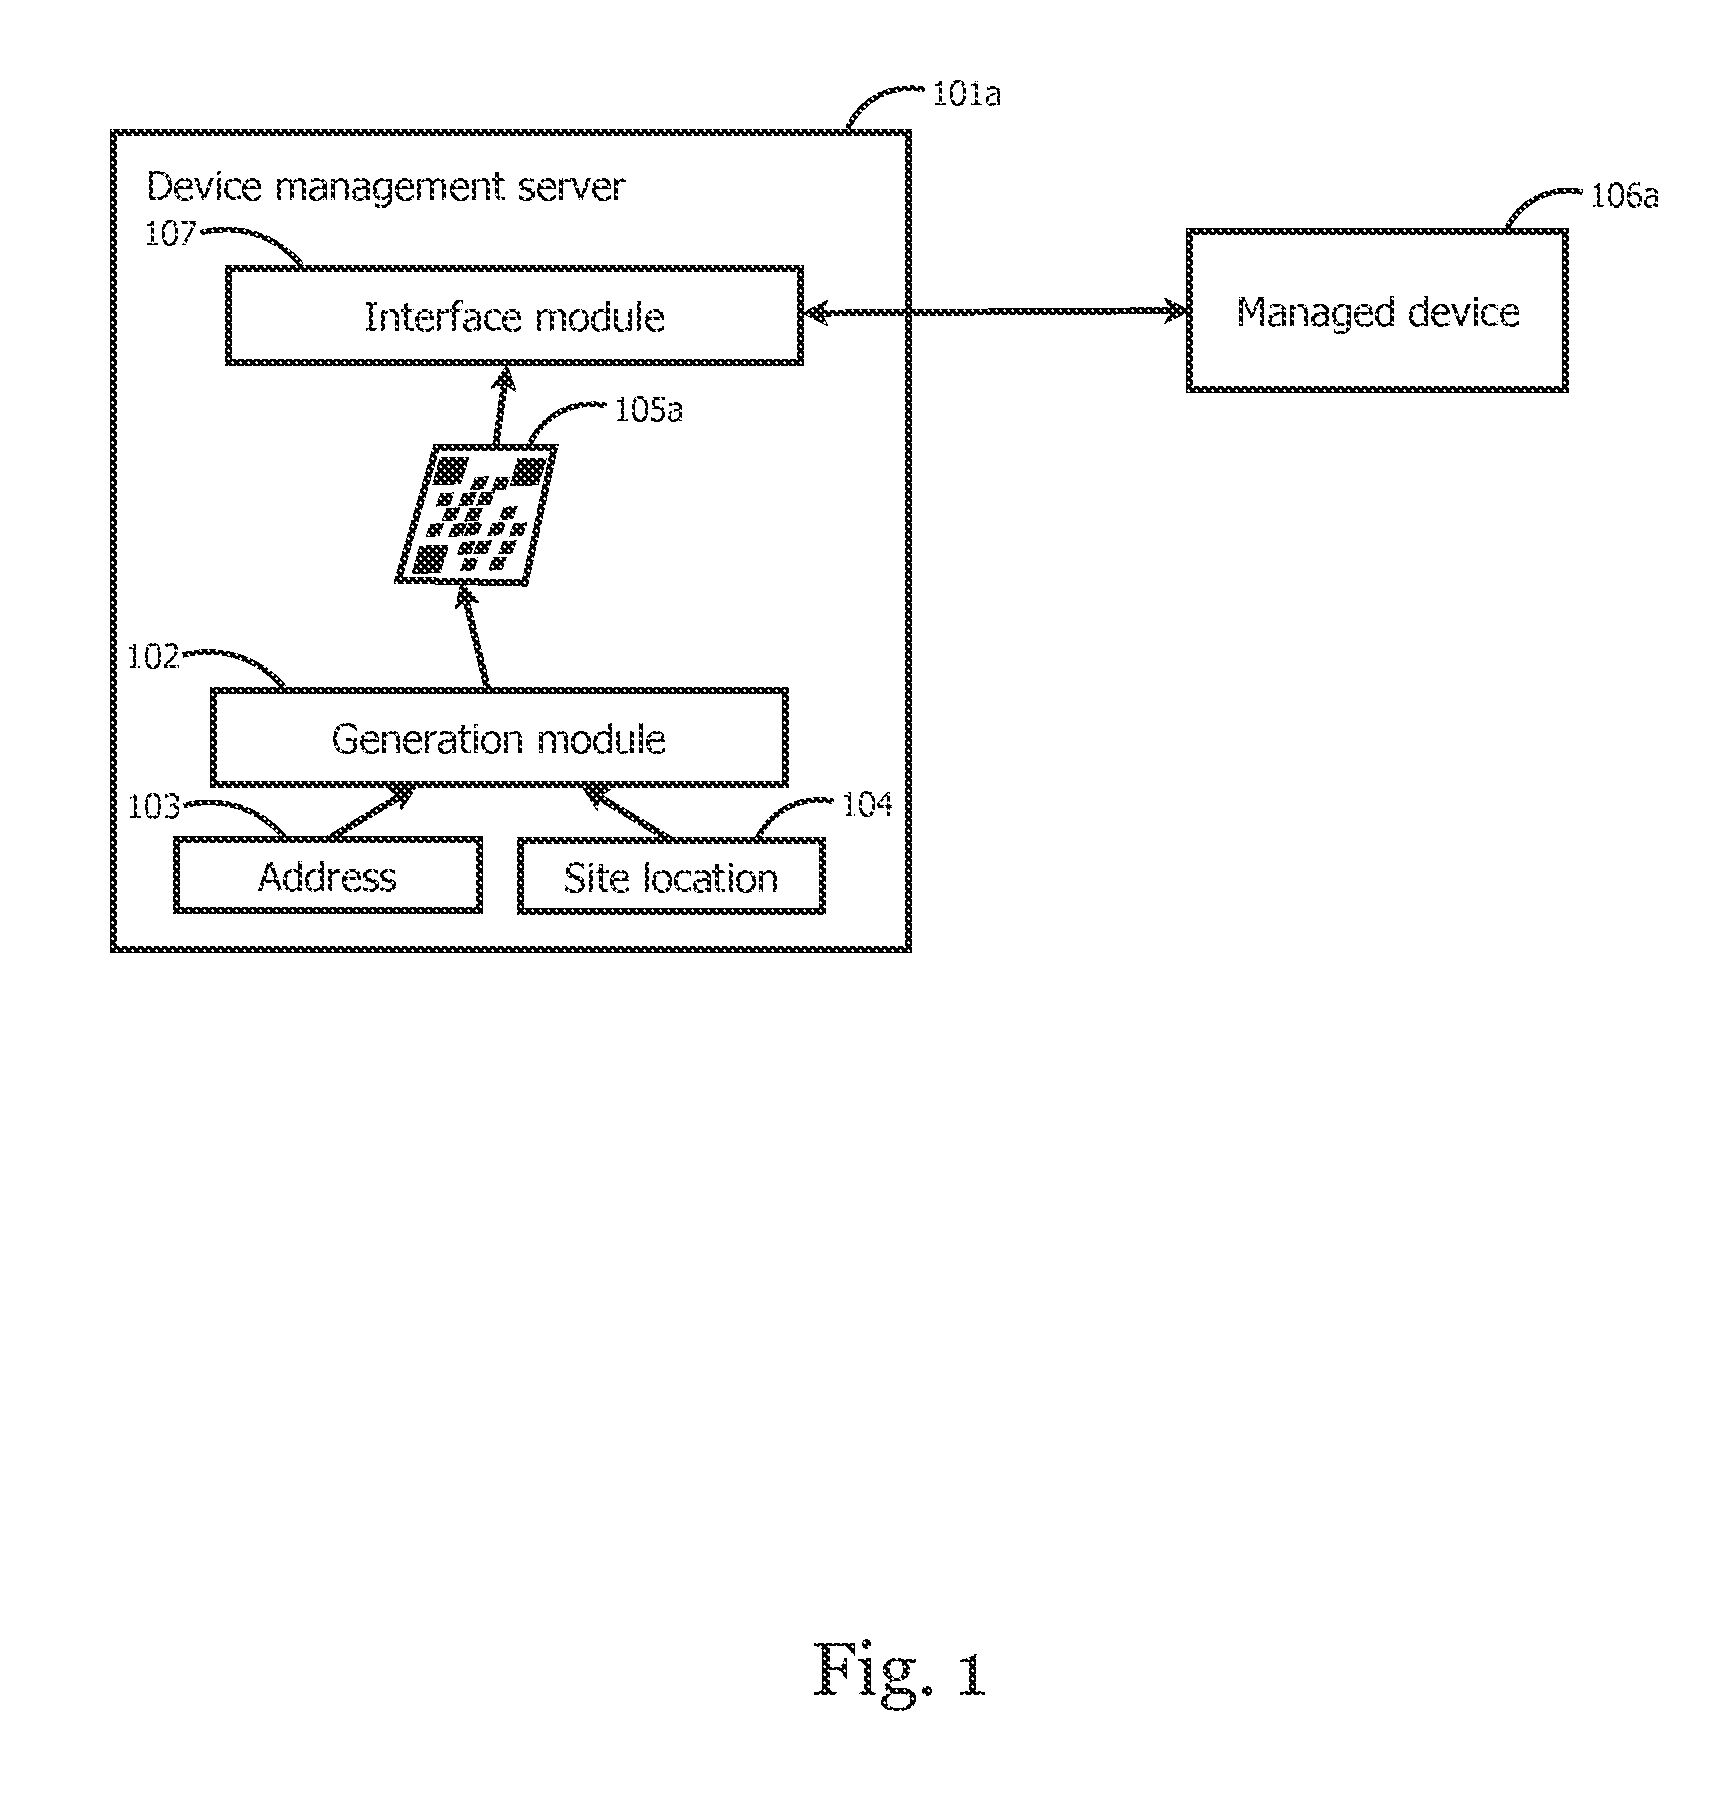 Systems and methods for configuring a managed device using an image